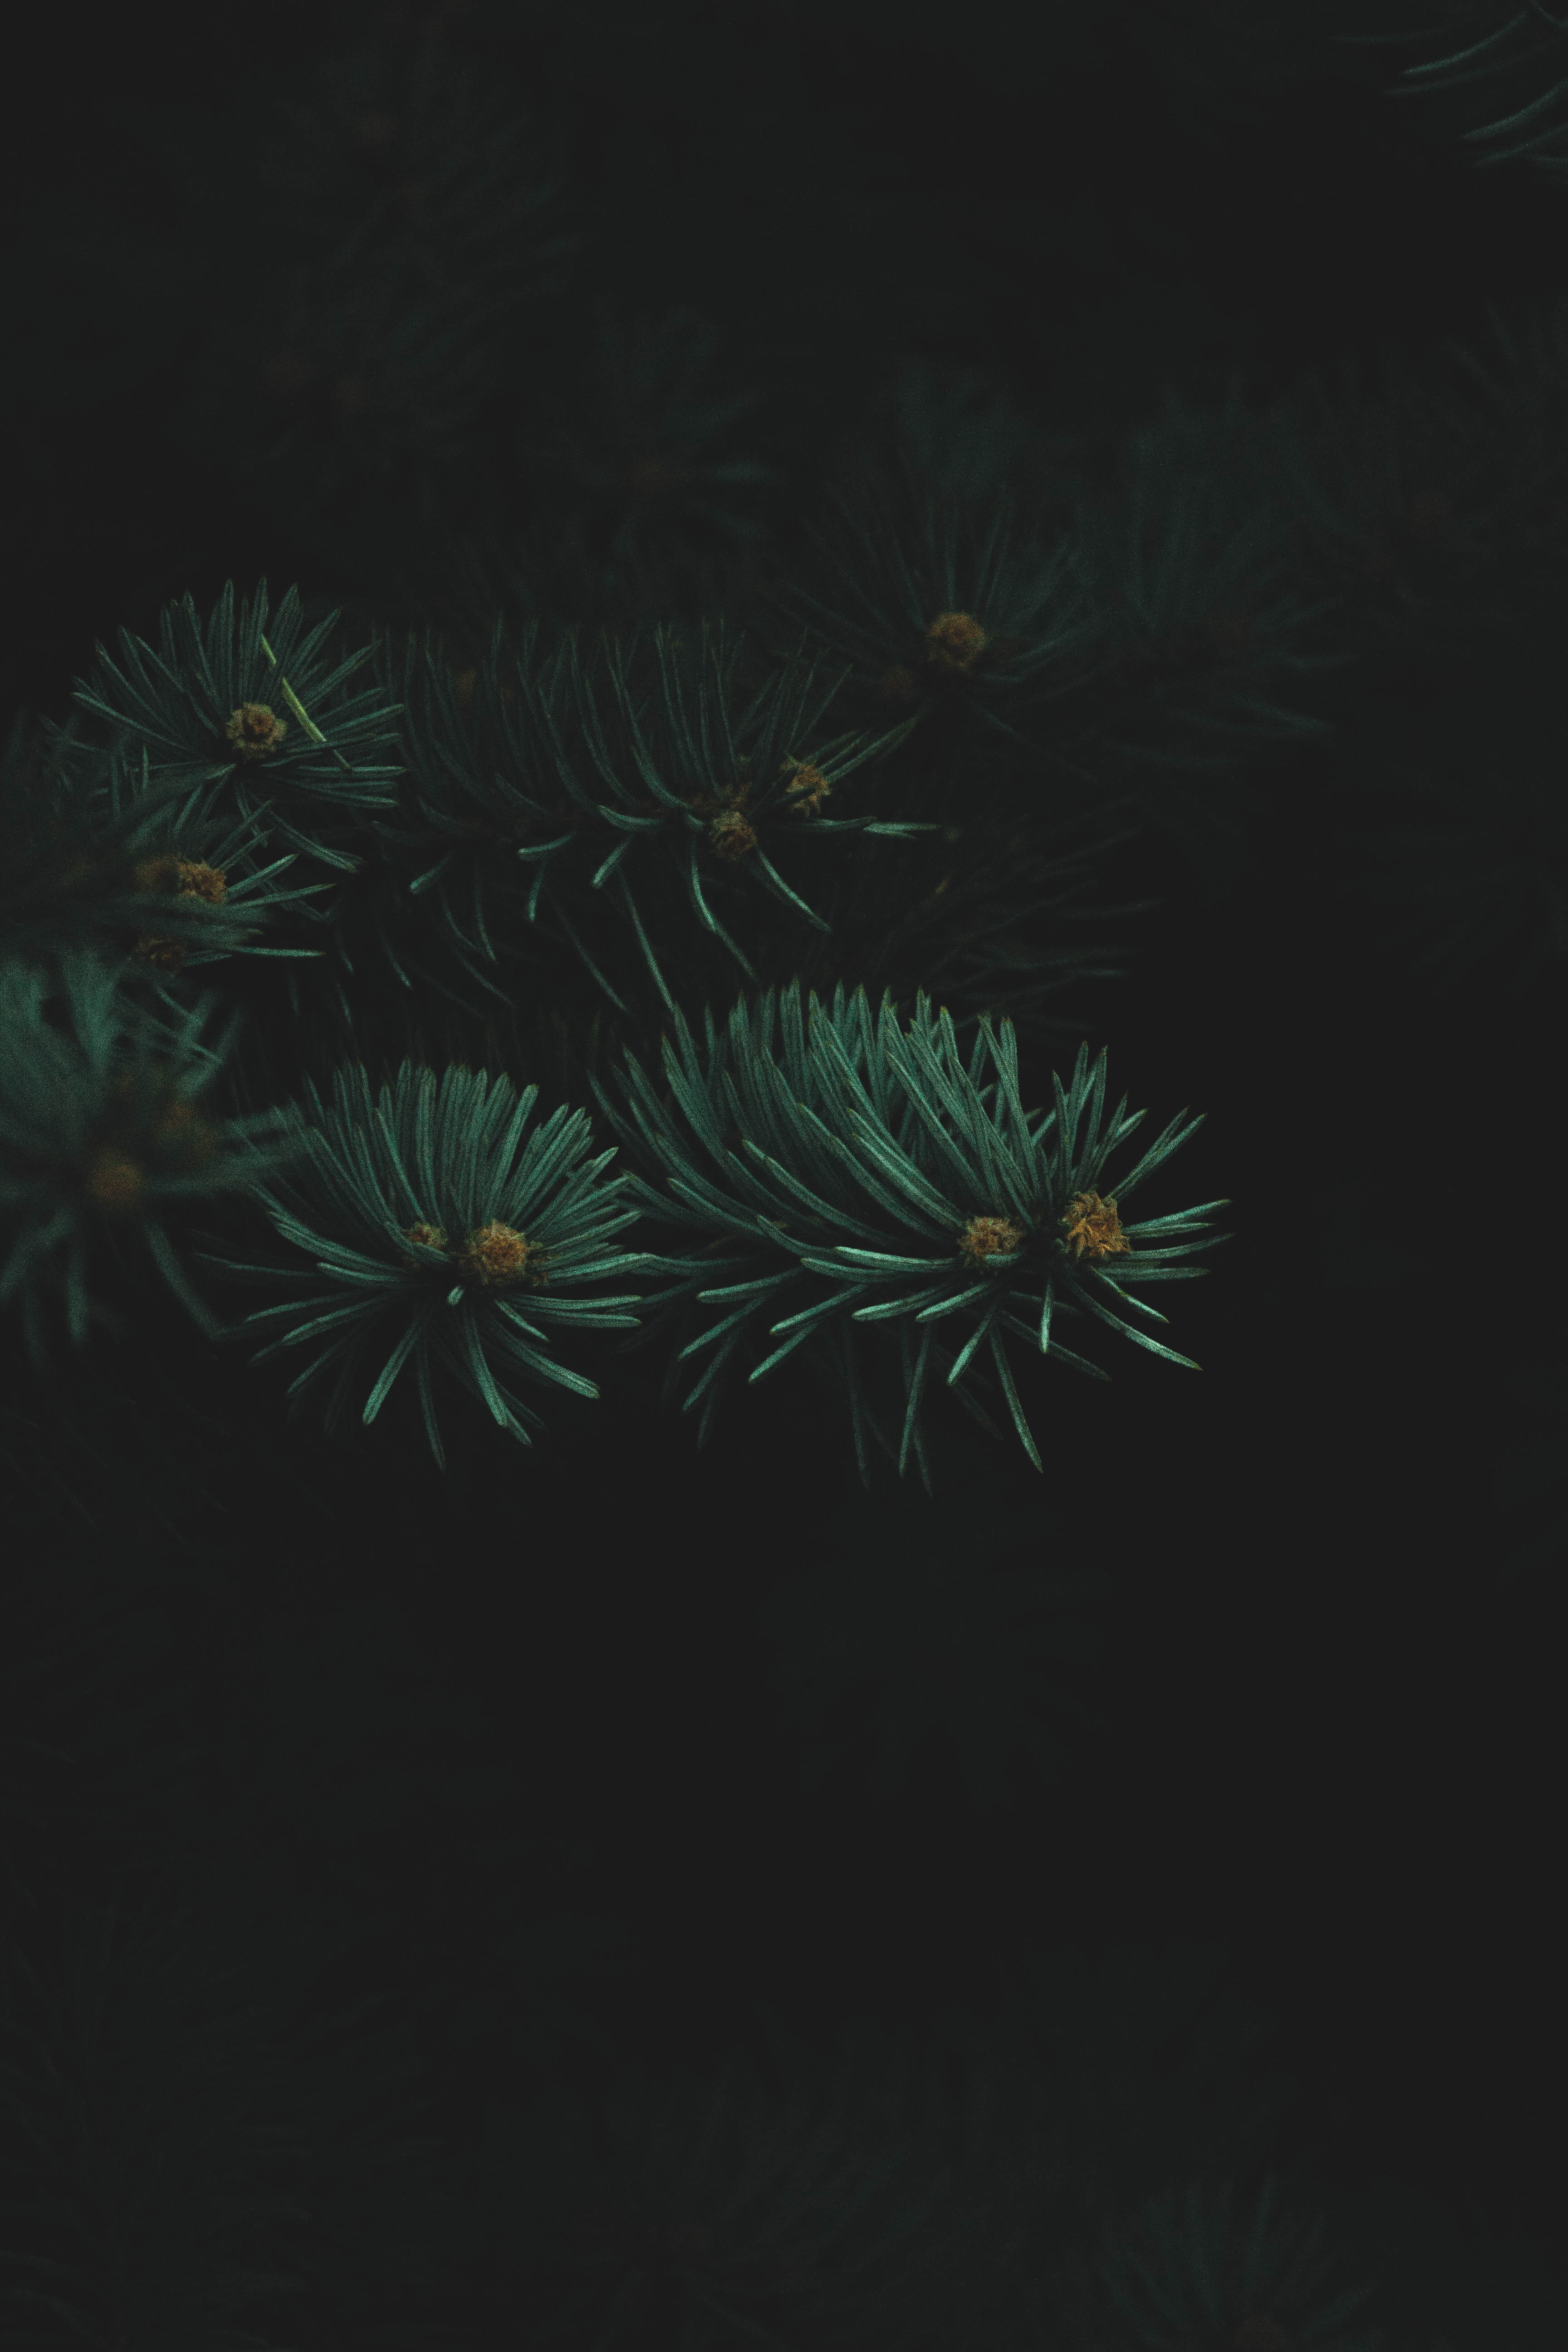 android needle, dark, branch, thick, needles, christmas tree